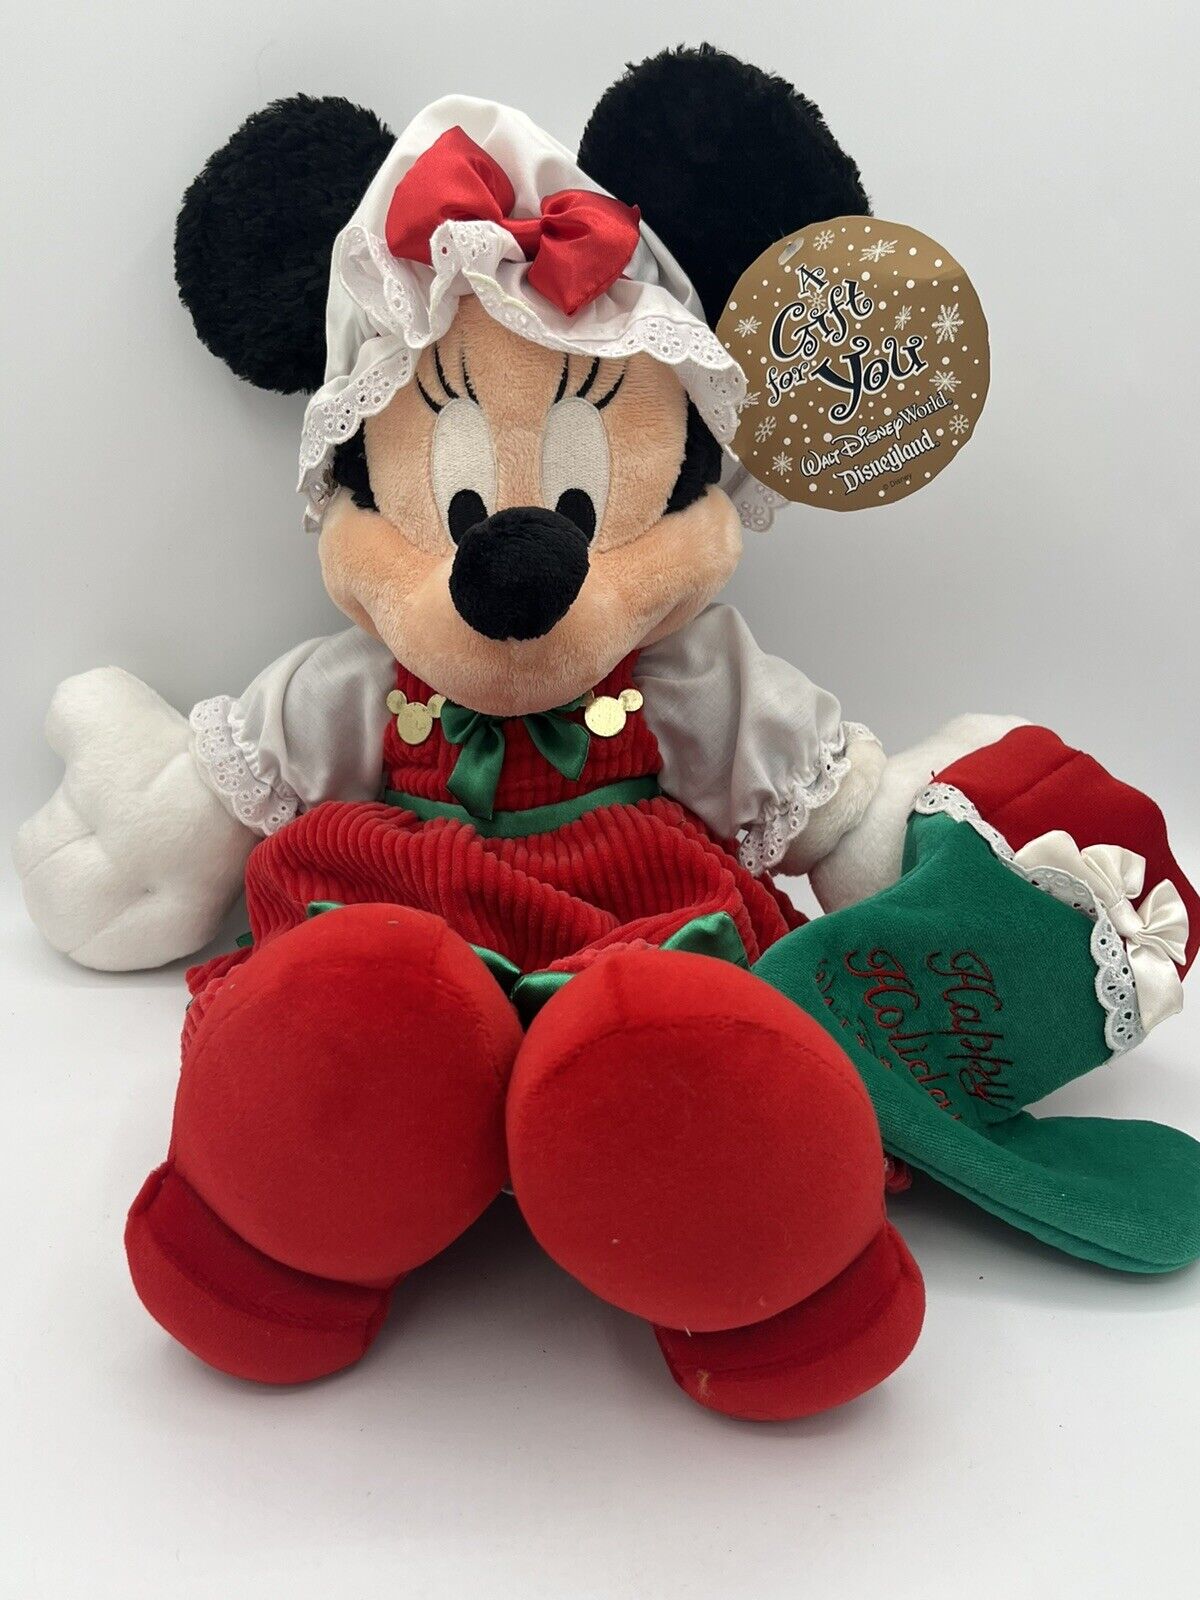 Walt Disney World 18” Plush Mrs Claus Minnie Mouse With Stocking Has Tags